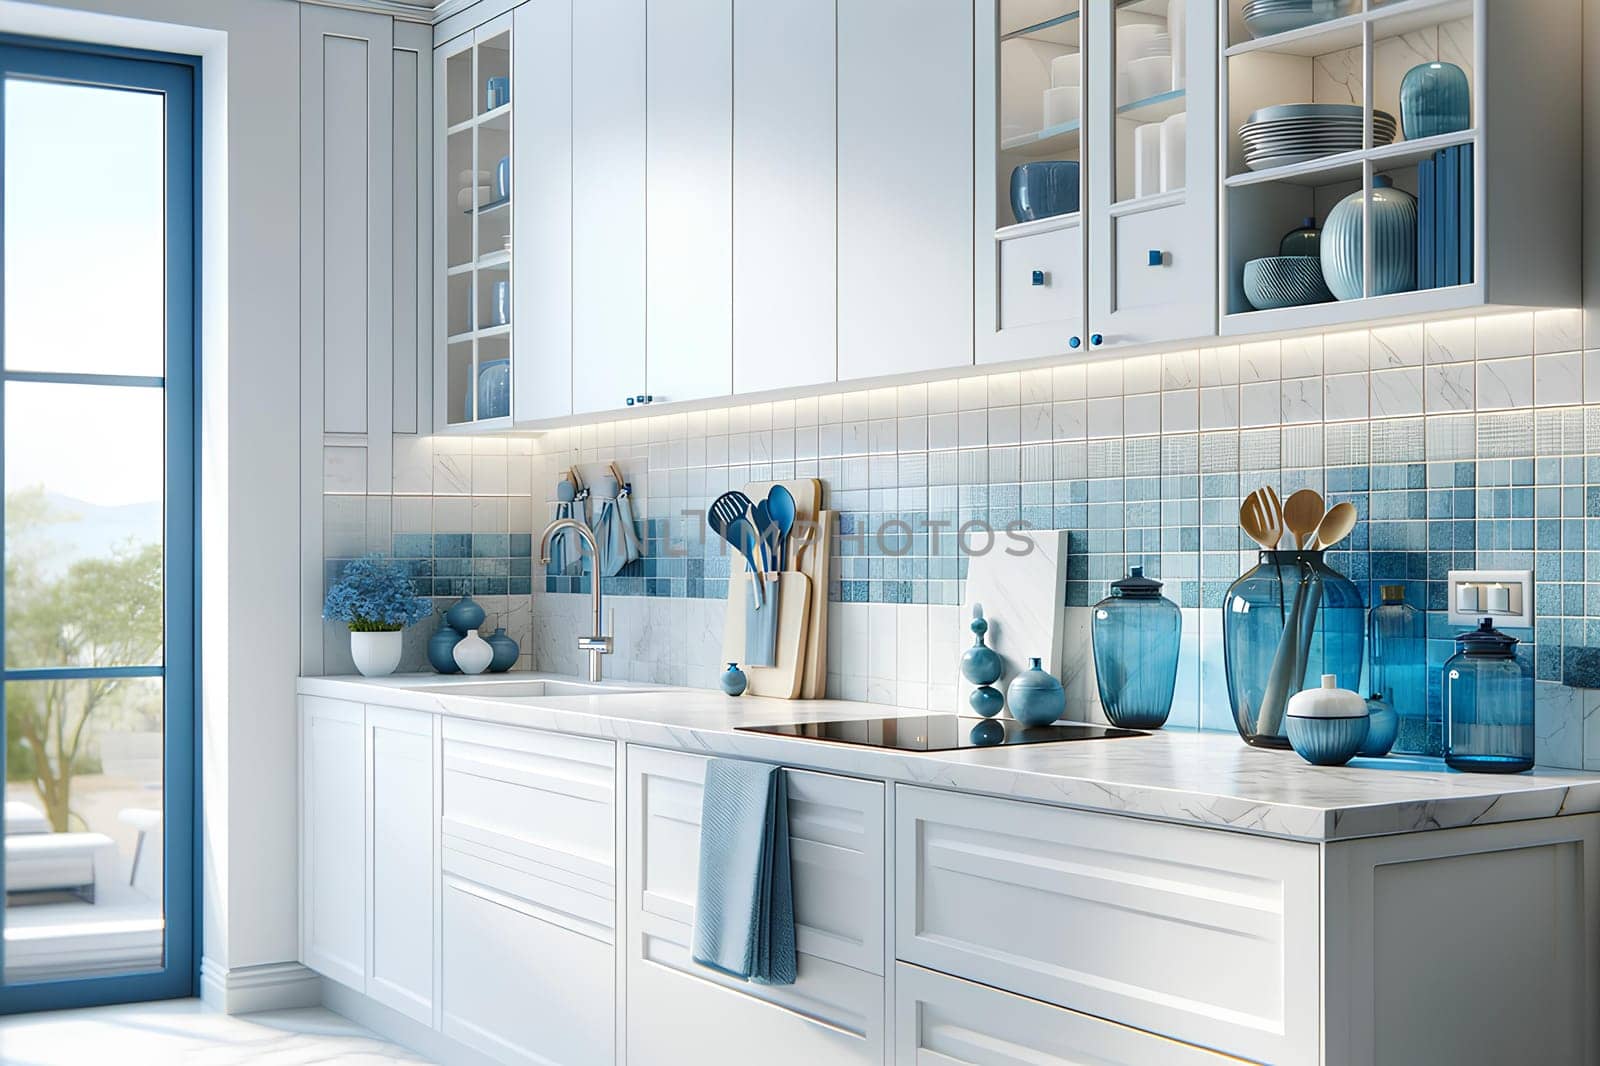 modern kitchen interior with white furniture and blue decorative elements by Annado